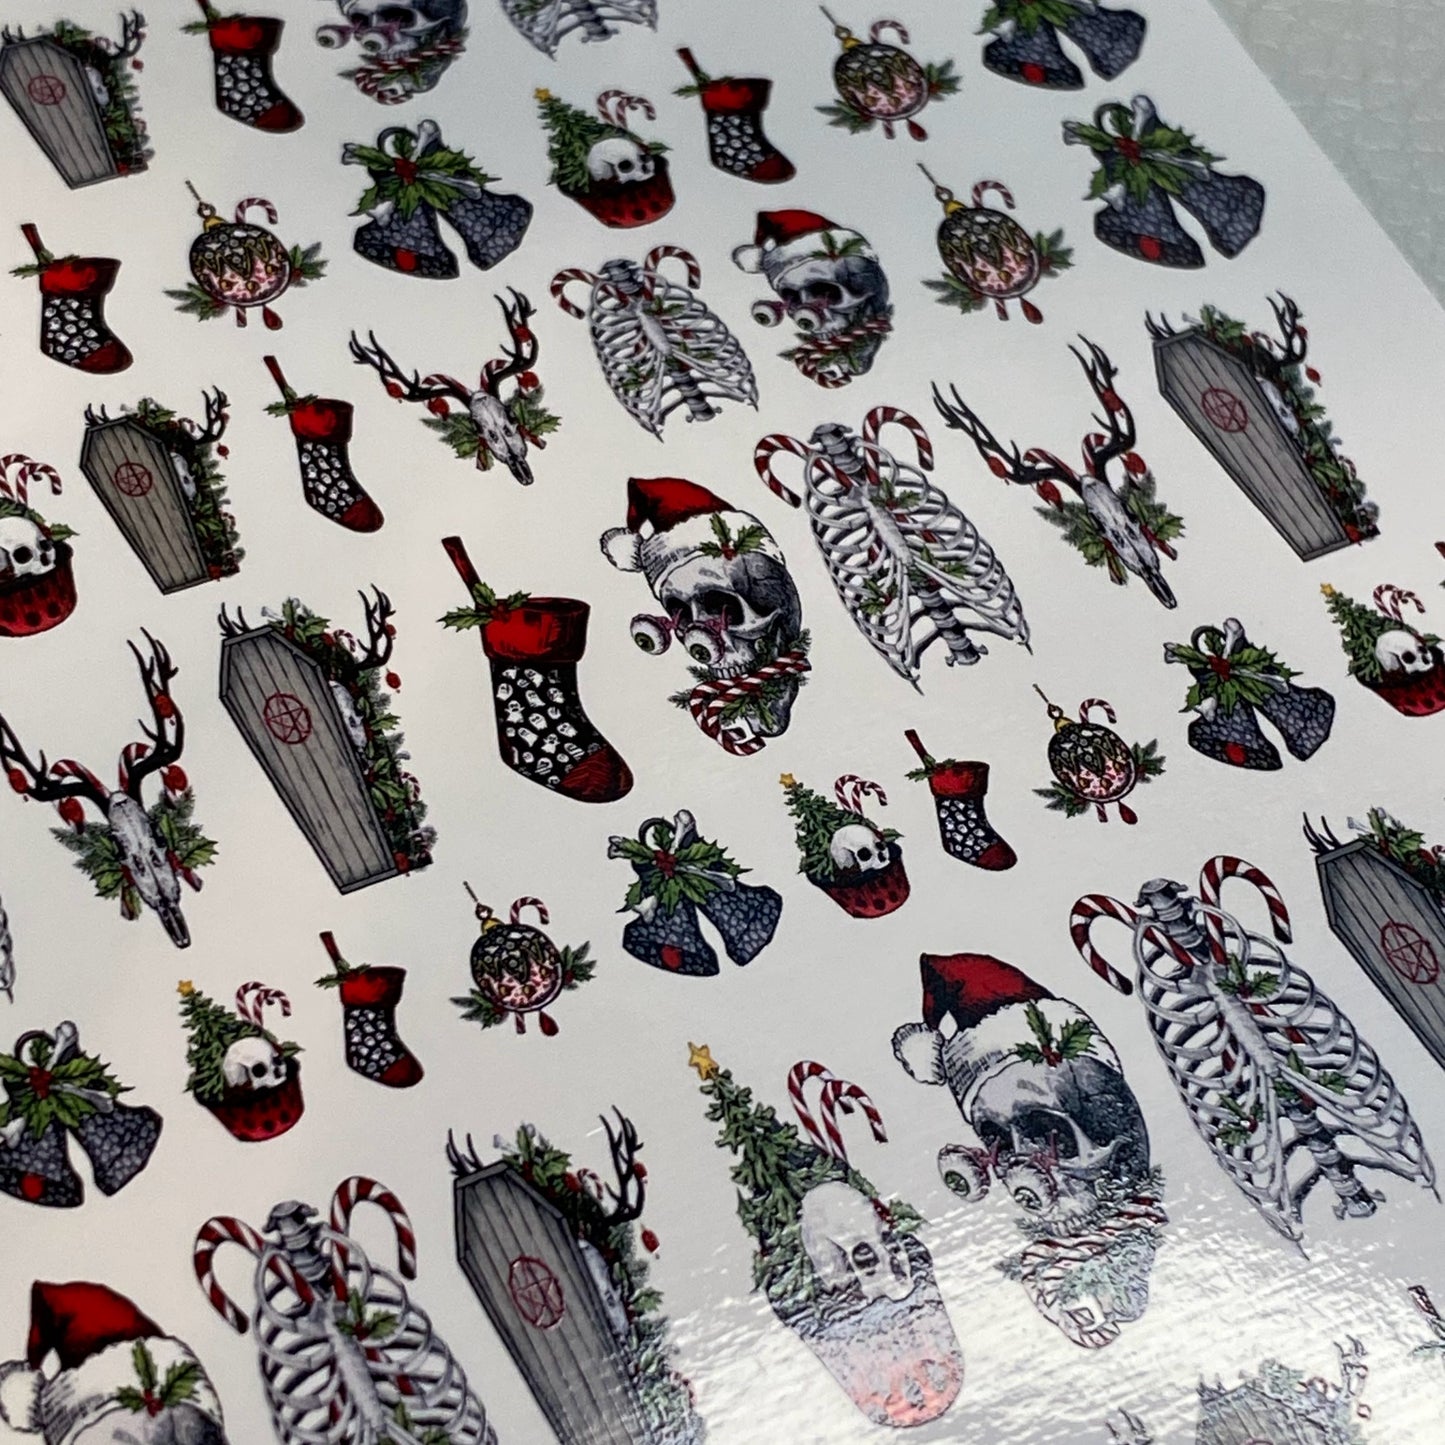 Have A Very Merry Emo Christmas - Decals For Nails